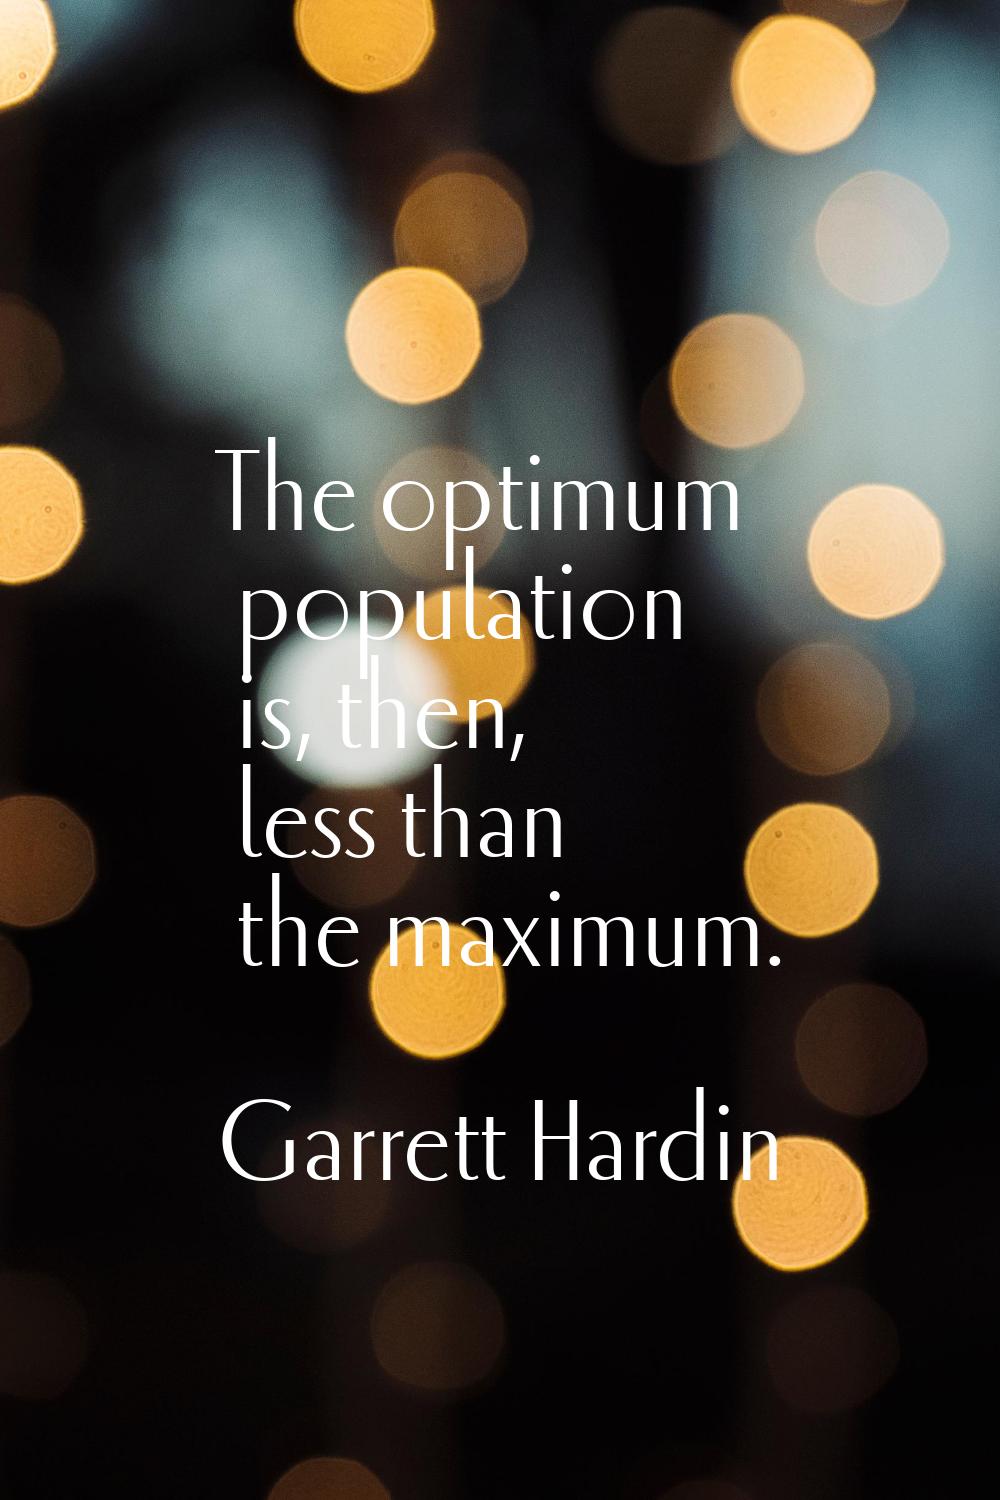 The optimum population is, then, less than the maximum.